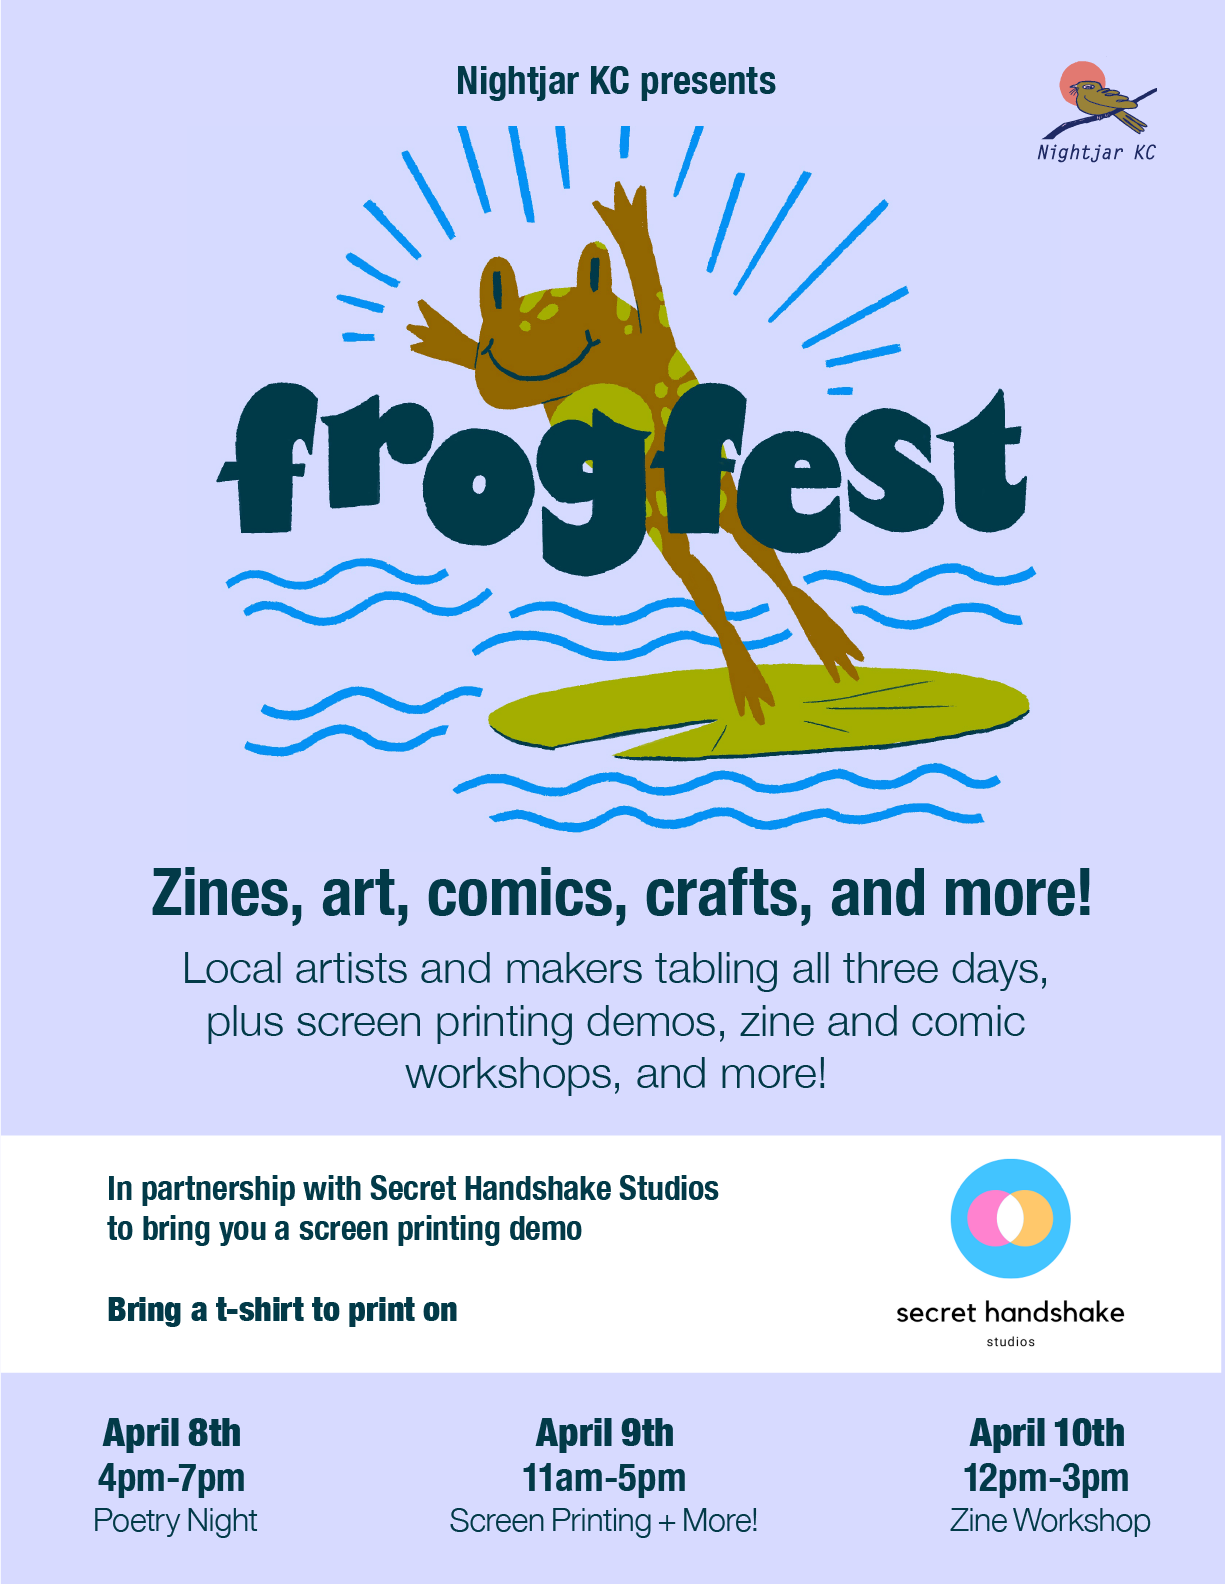 Nightjar presents FrogFest! 3 days of zines, art, crafts, and more. April 8th-9th